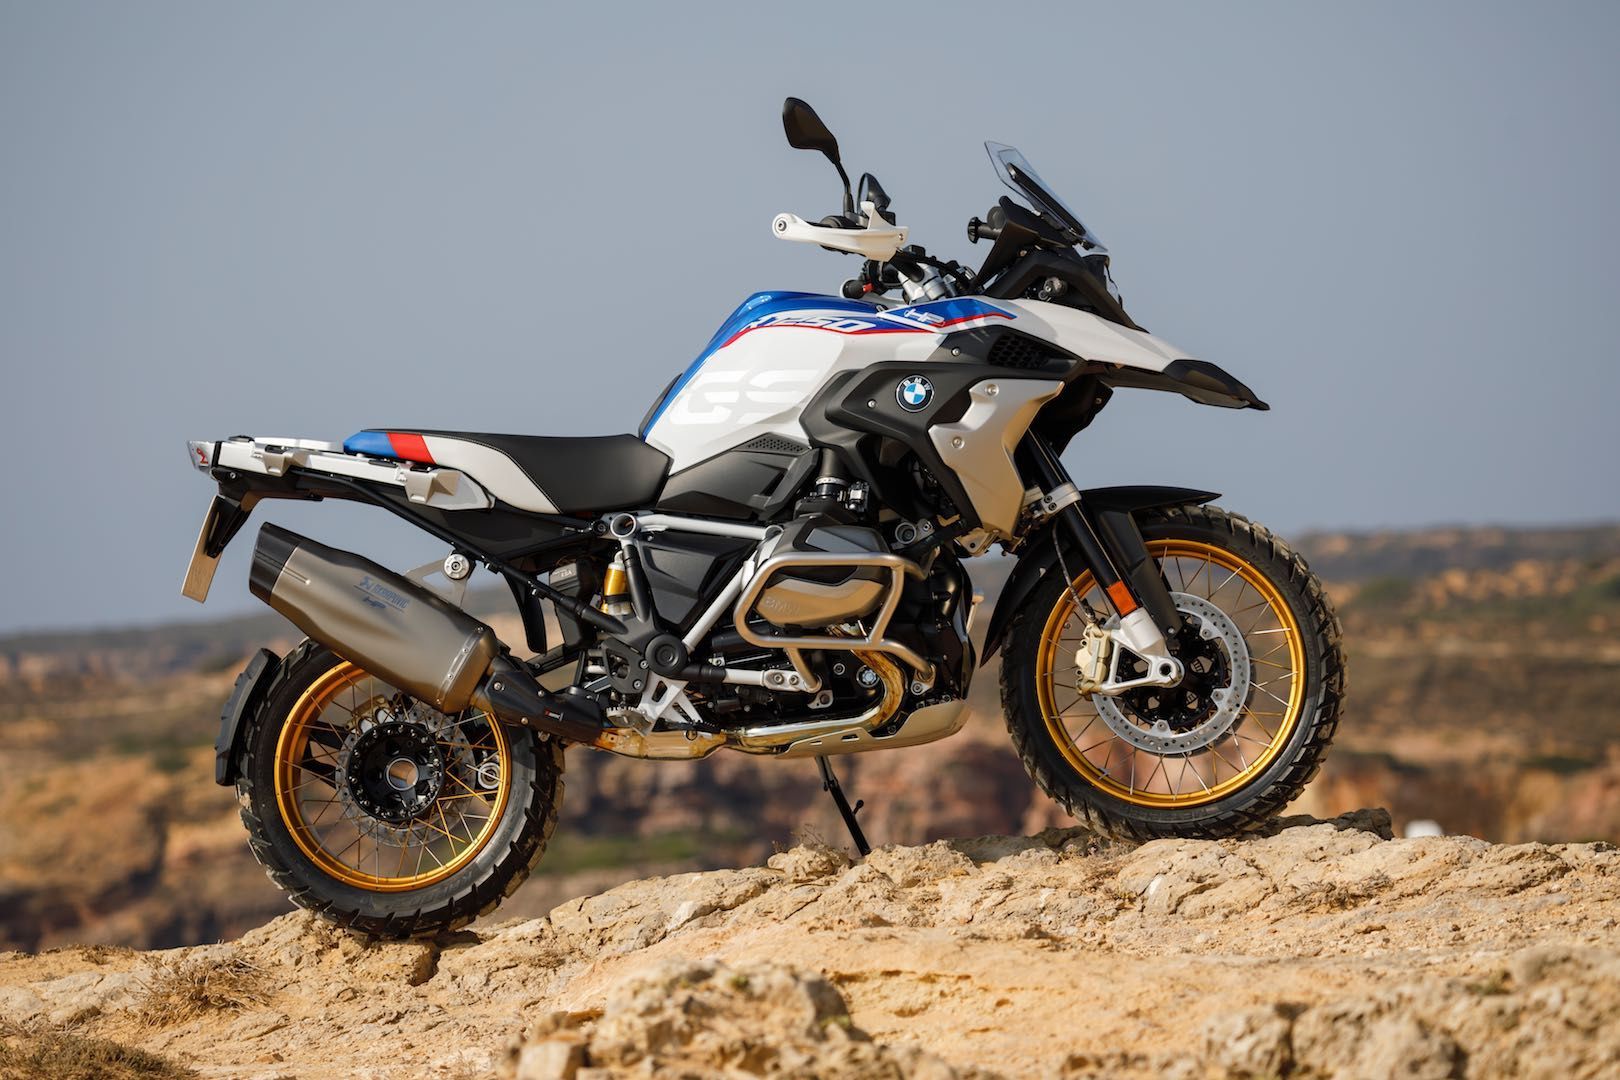 Bmw 1250 Gs 2019 Wallpaper from 2019 Bmw R 1250 Gs Unveiled With